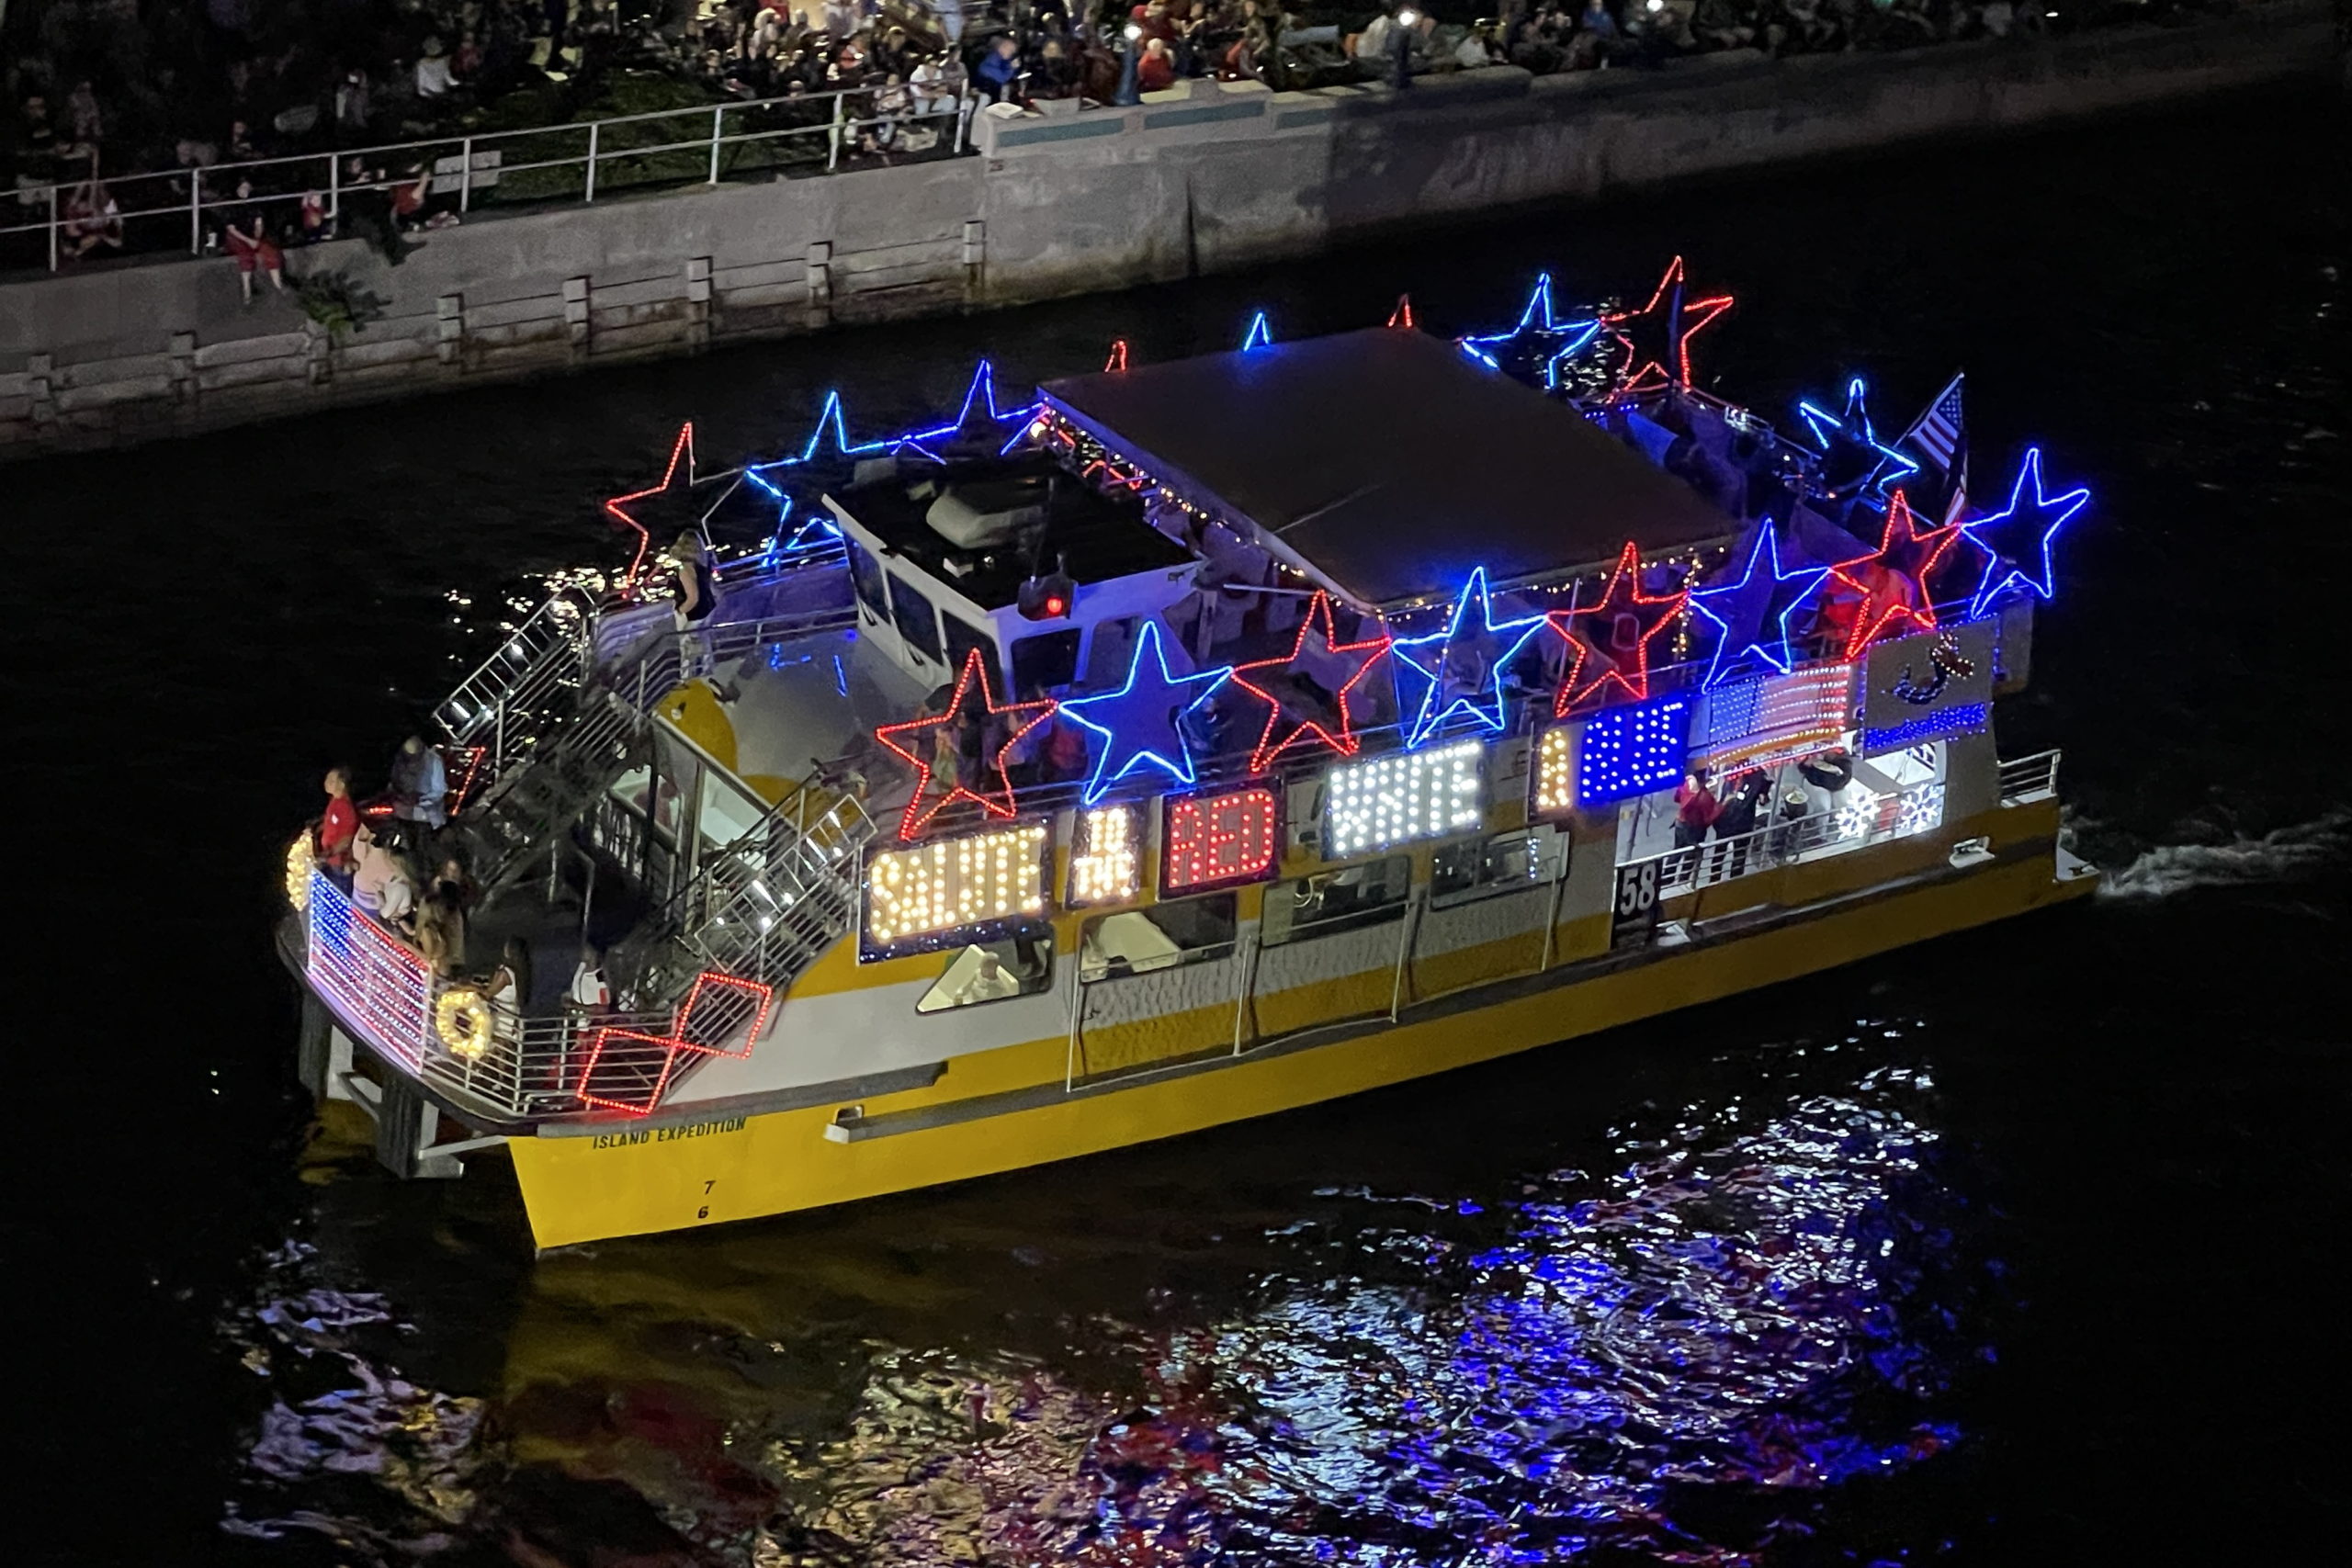 Freedom Waters aboard Water Taxi Island Expedition, boat number 58 in the 2022 Winterfest Boat Parade